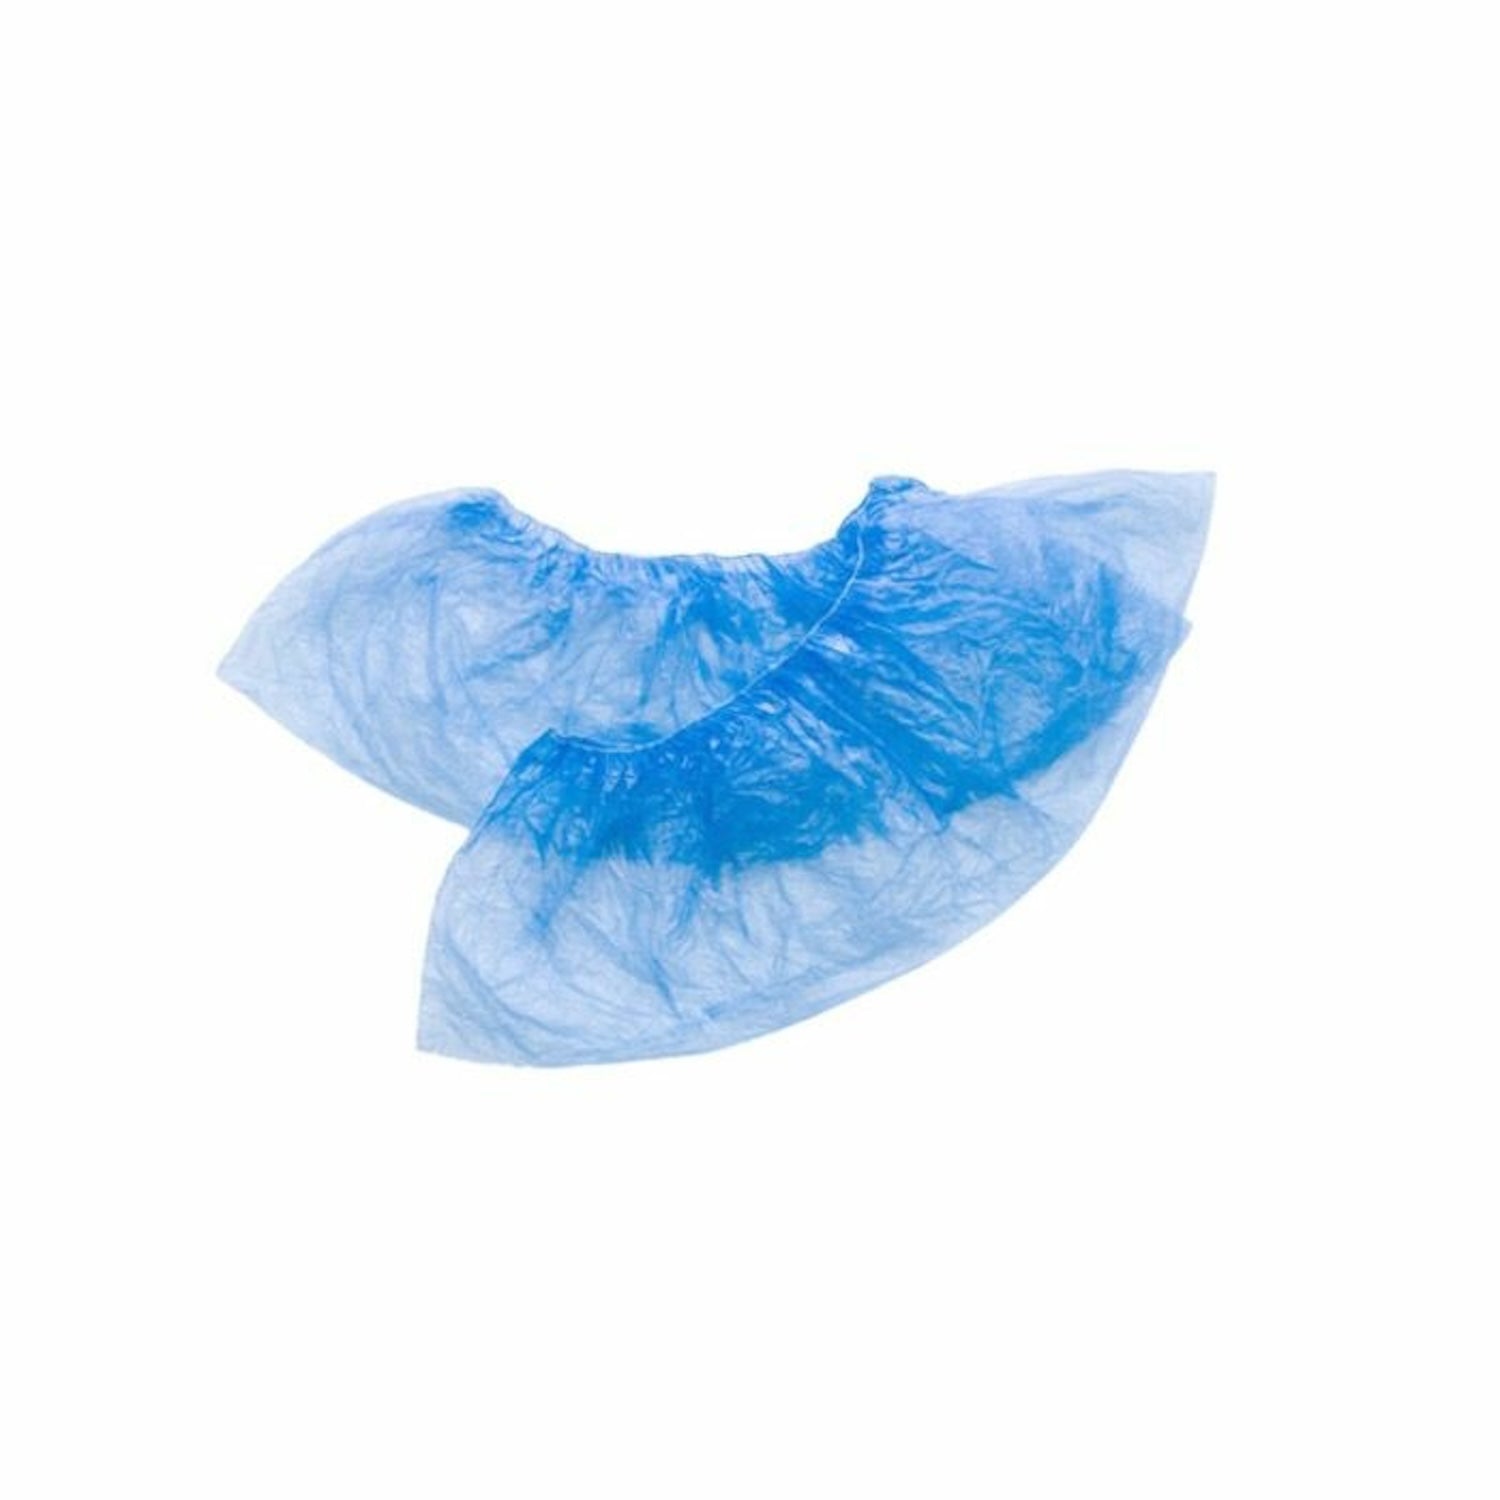 Premier Polythene Shoe Covers | Small | Pack of 100 (2)